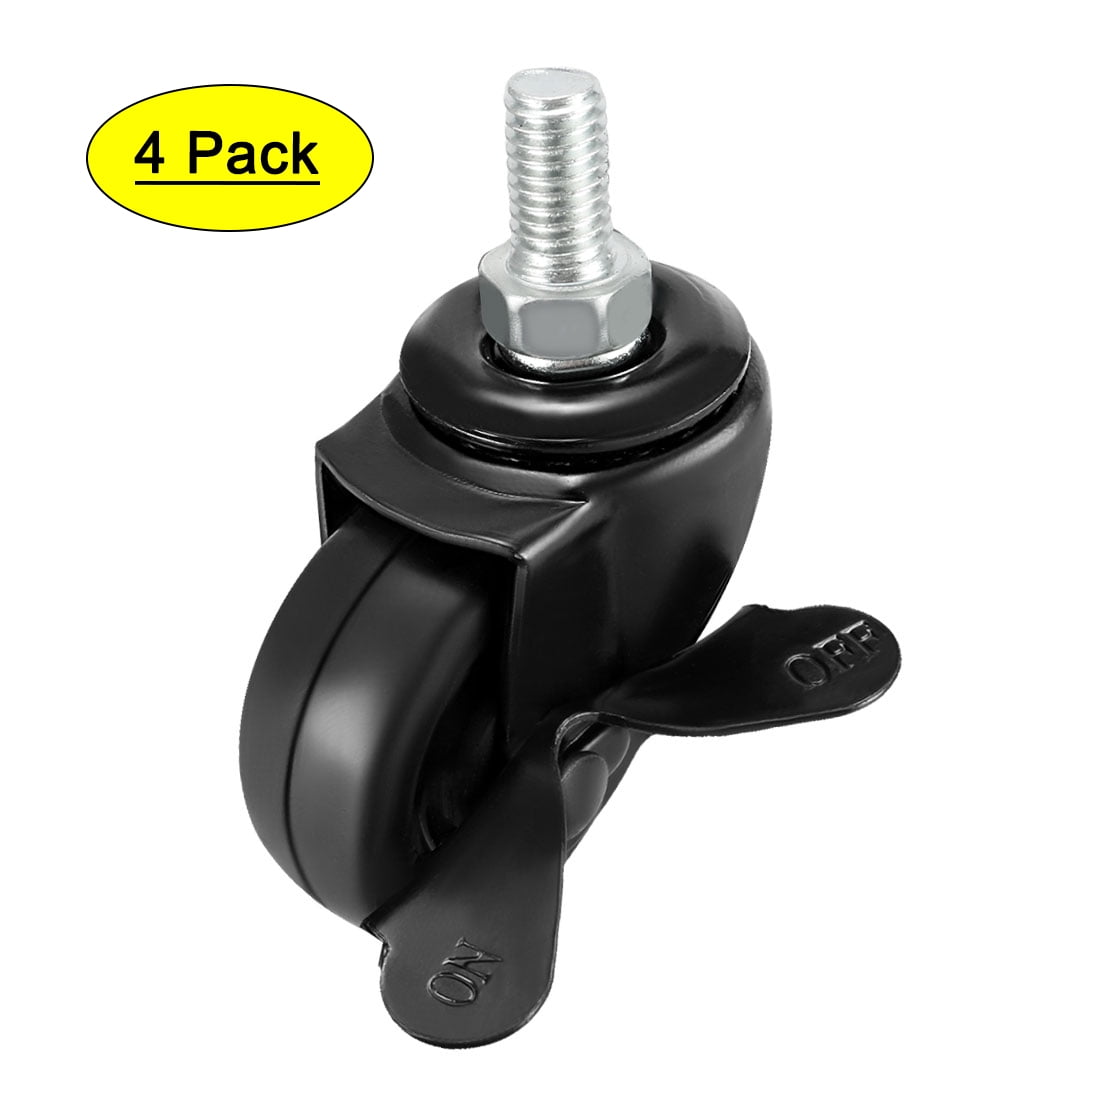 MroMax 2 Inch Swivel Caster Wheels PP 360 Degree Threaded Stem Caster Wheel with Brake M8 x 15mm Pack of 4 198lb Total Load Capacity